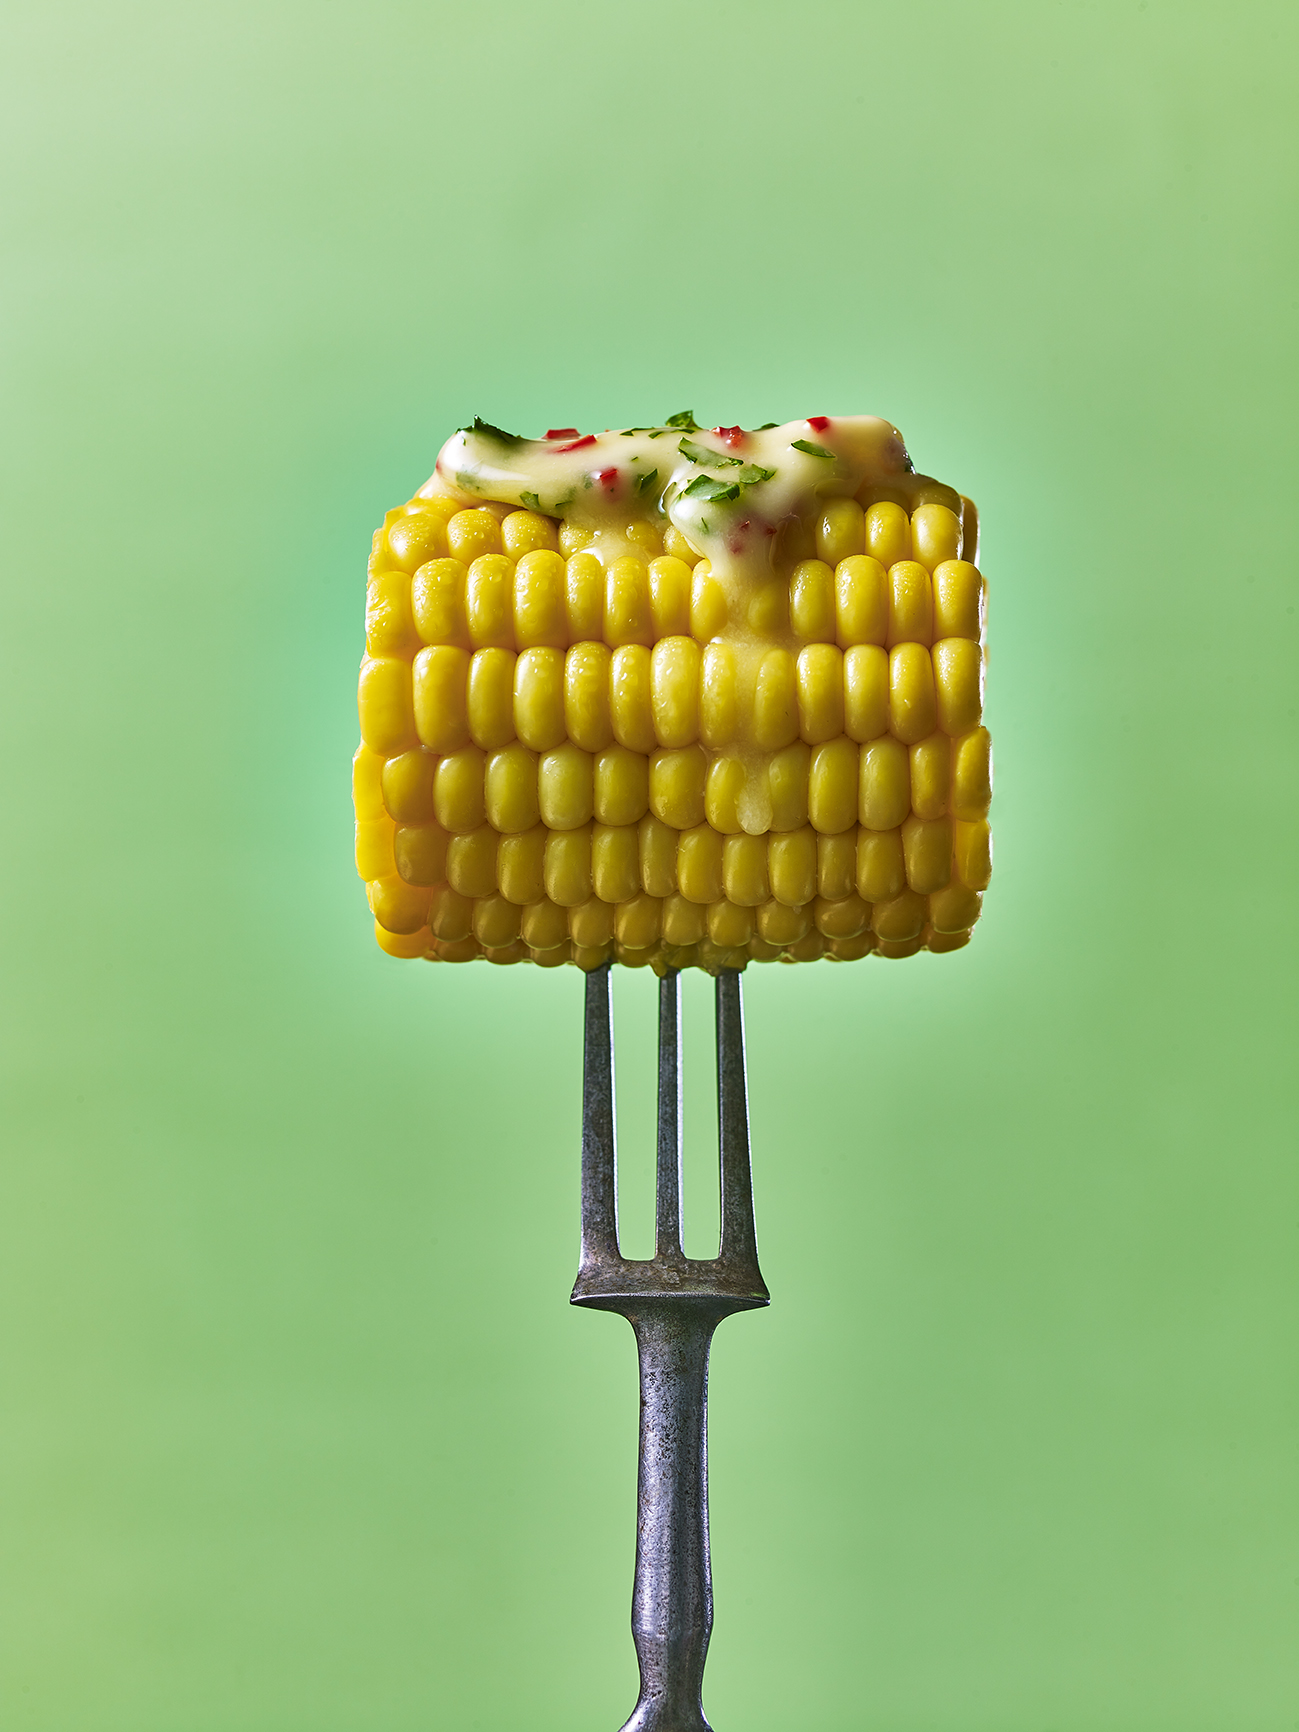 Corn on the cob with melting butter